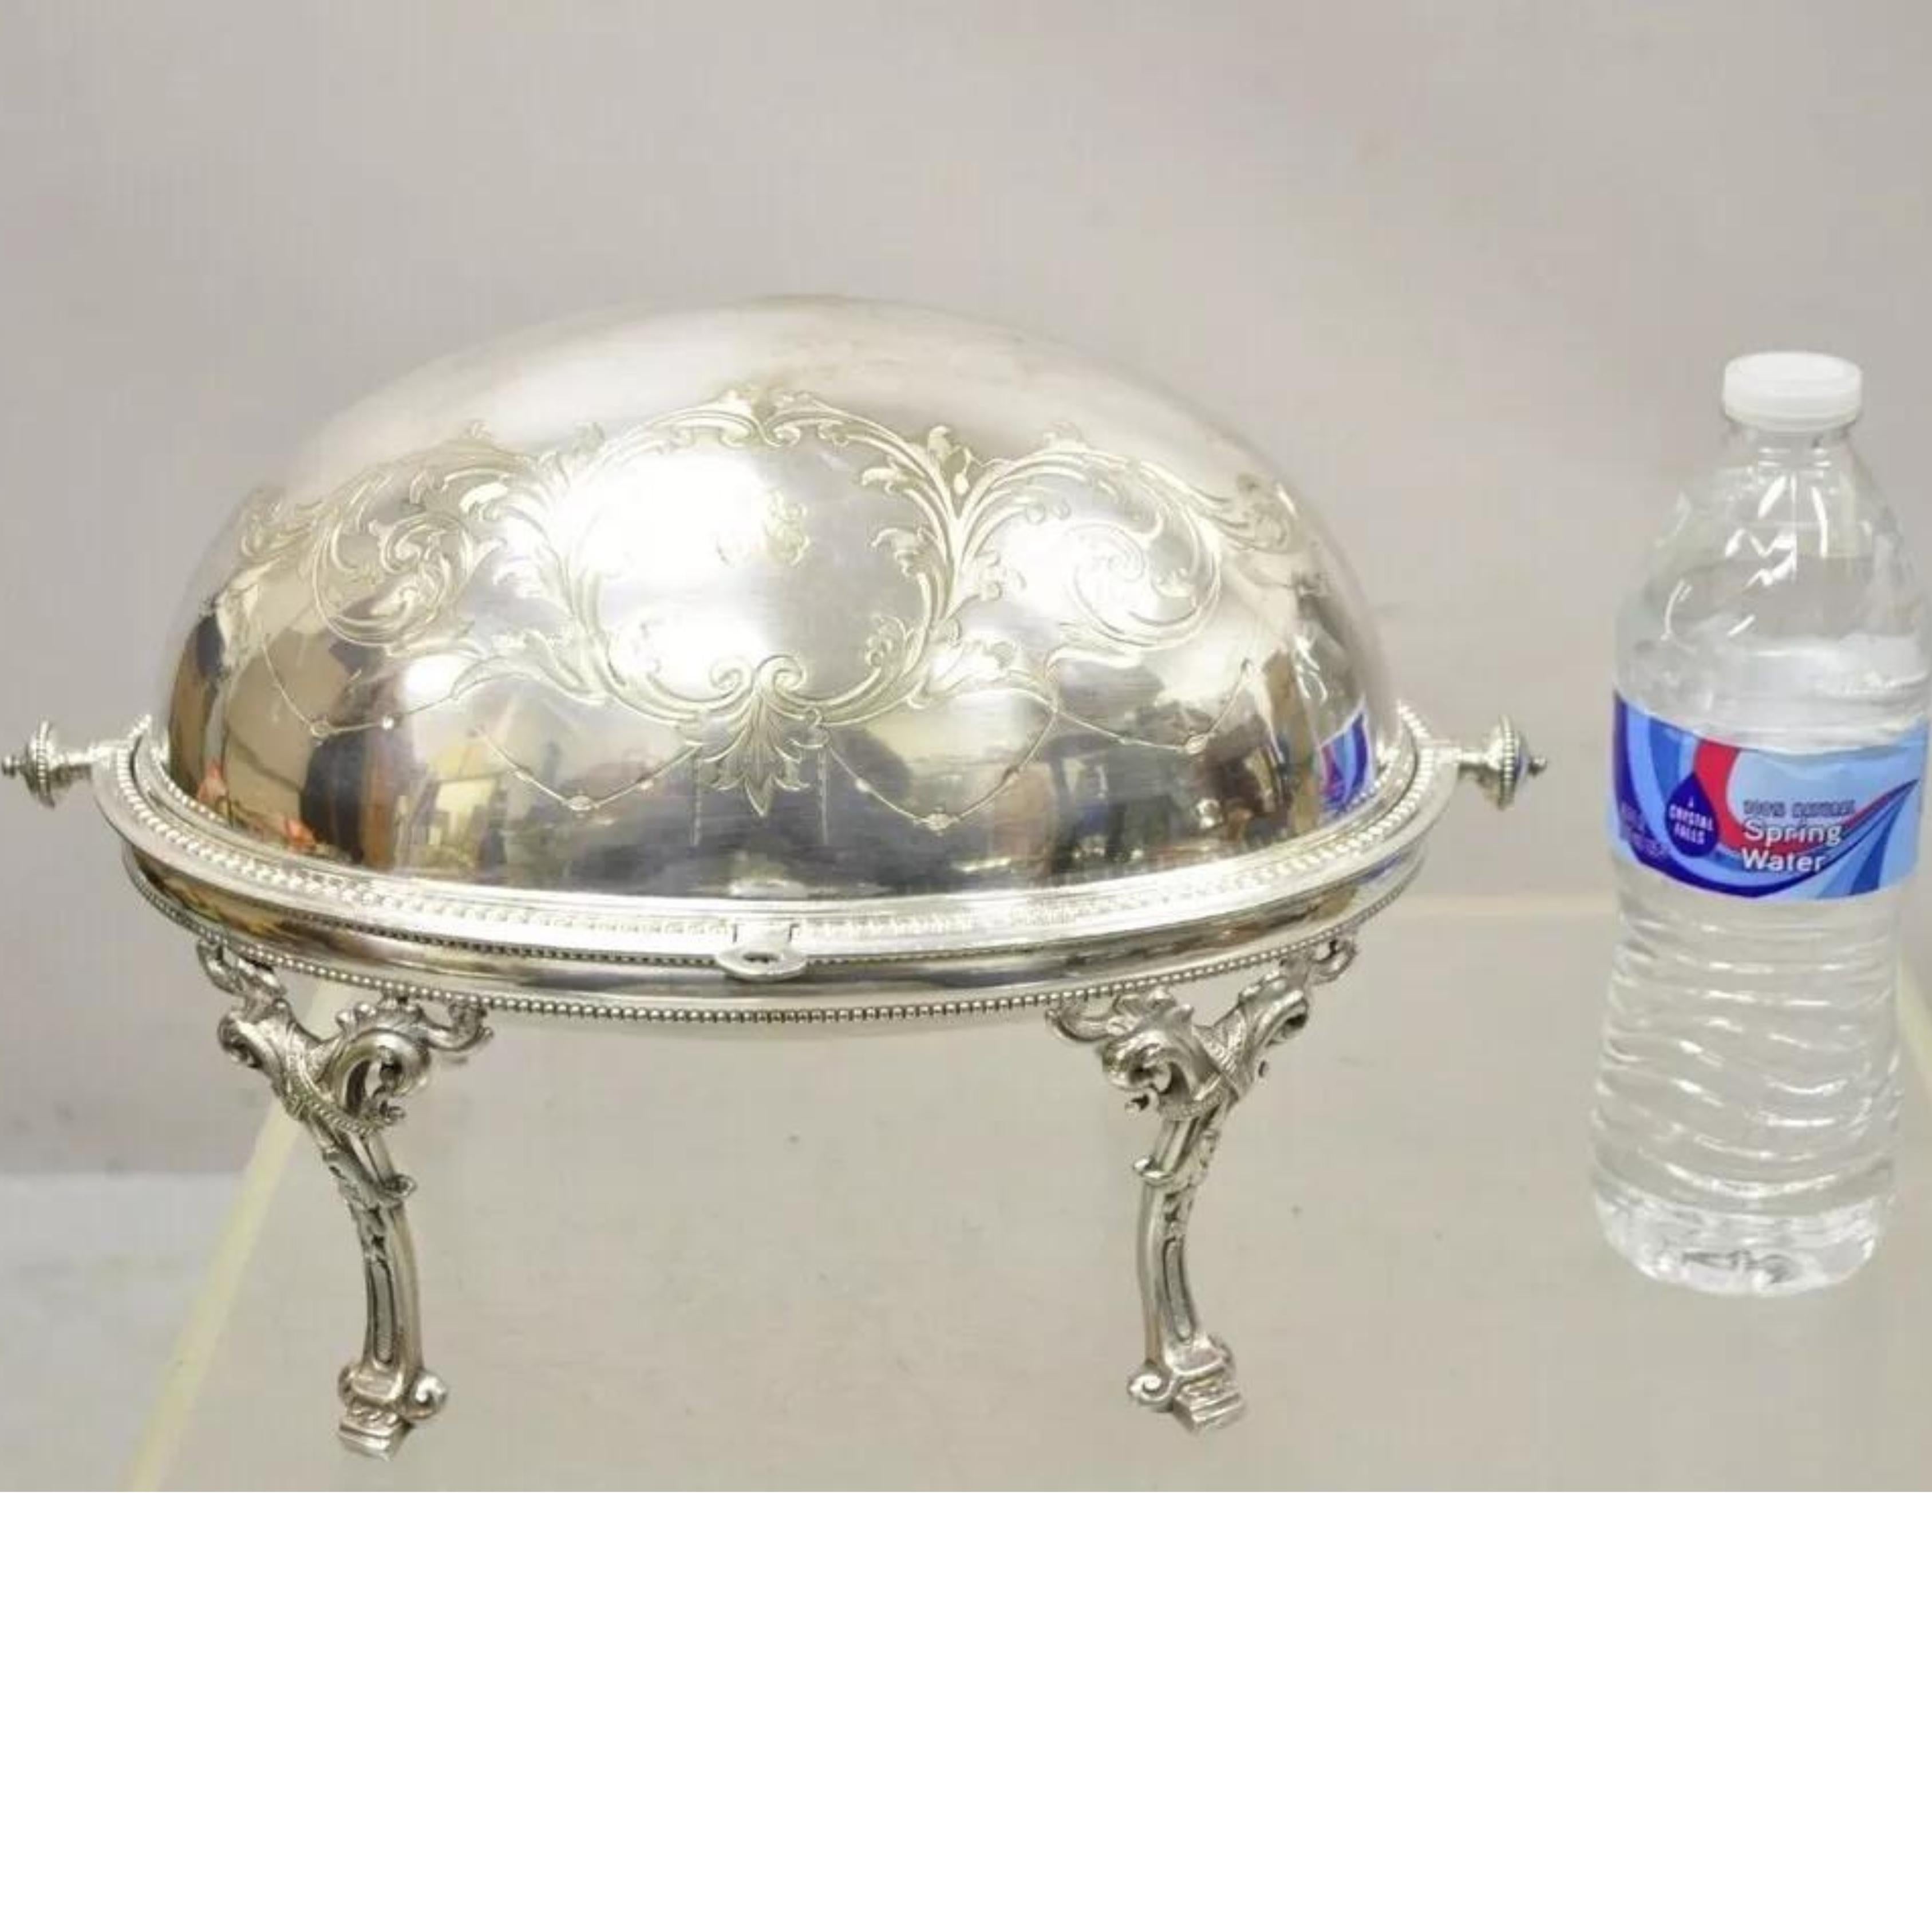 Antique Edwardian Silver Plated Revolving Dome Oval Chafing Dish Food Warmer For Sale 4